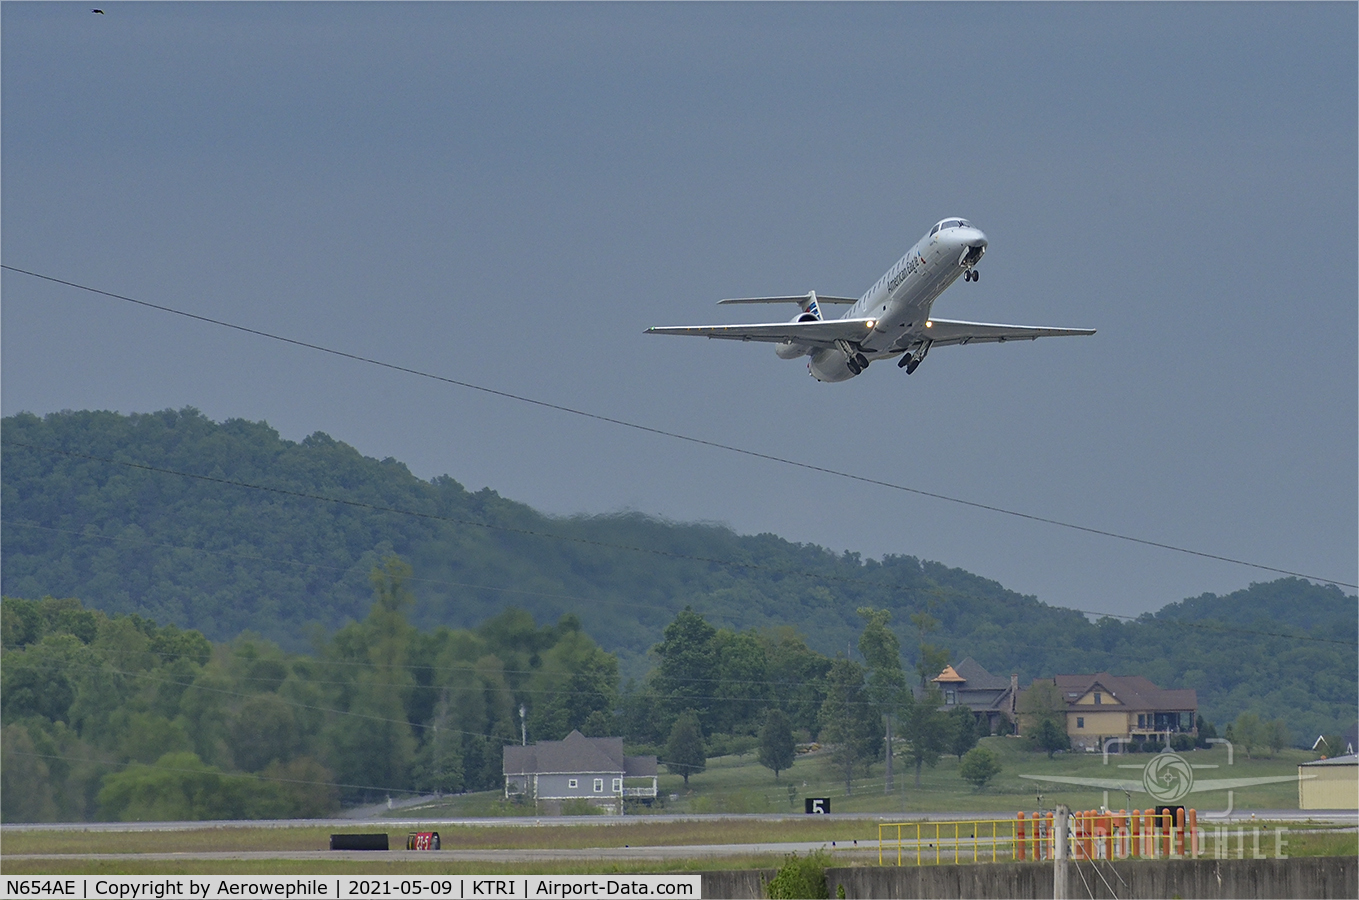 N654AE, 2001 Embraer ERJ-145LR (EMB-145LR) C/N 145437, Lifting off from Tri-Cities Airport.
09May21